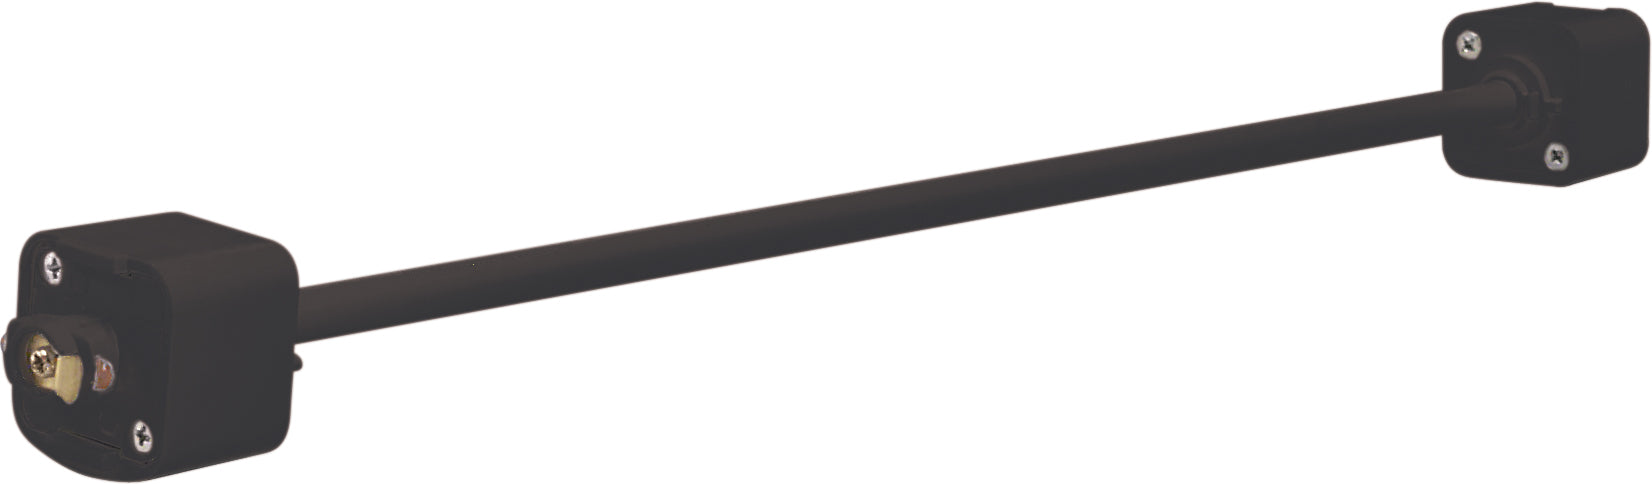 SATCO/NUVO 36 Inch Extension Wand Black Finish (TP165)